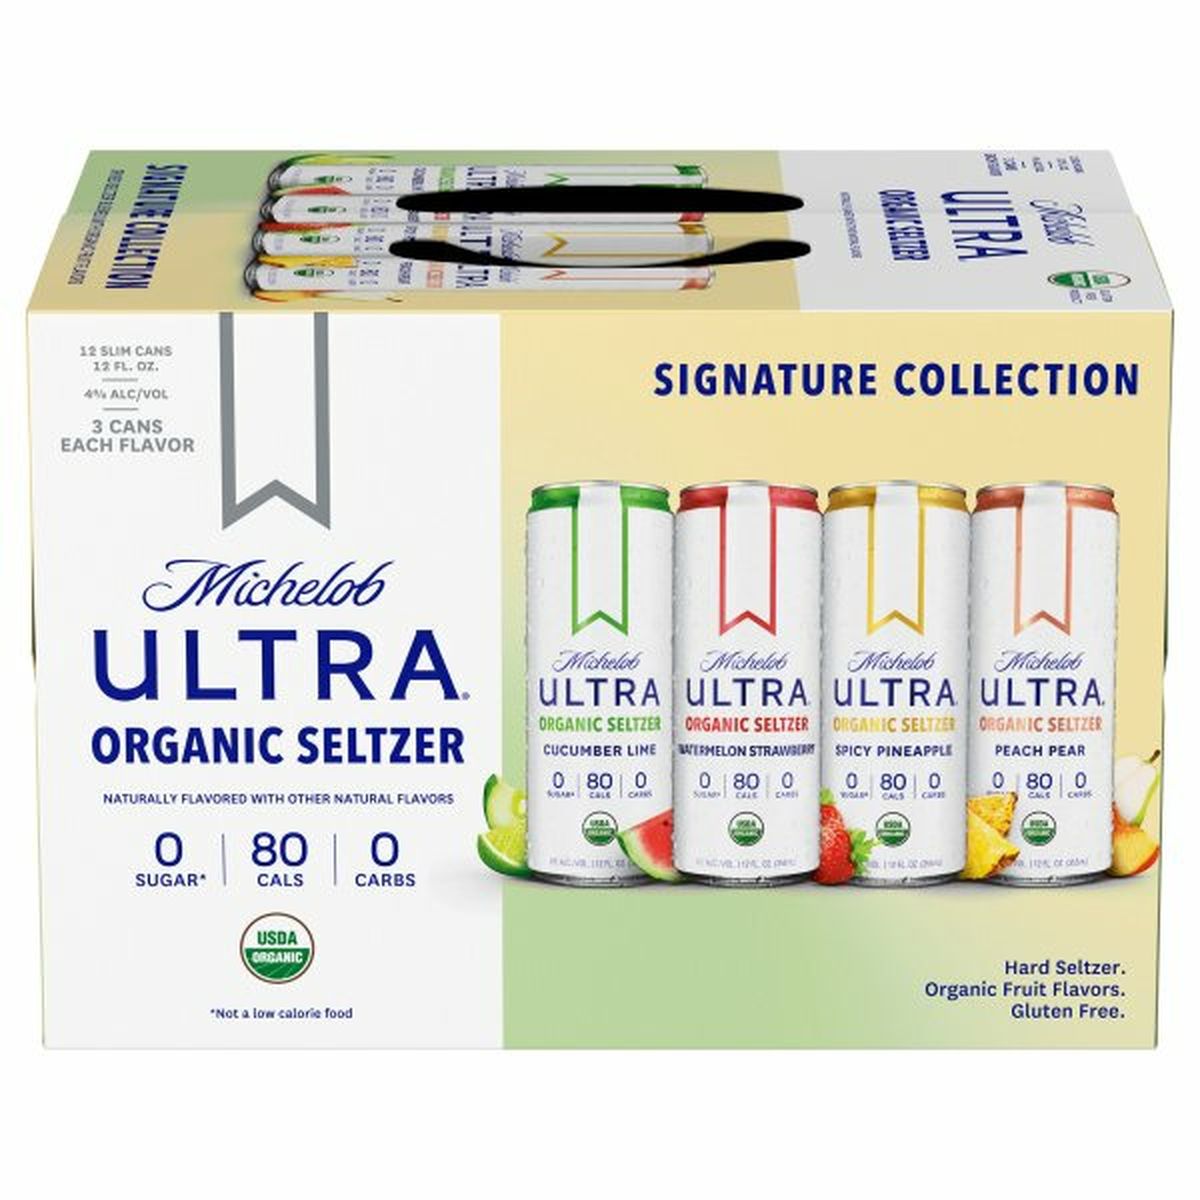 Calories in Michelob Ultra Organic Variety Pack 1 Seltzer 12/12oz cans